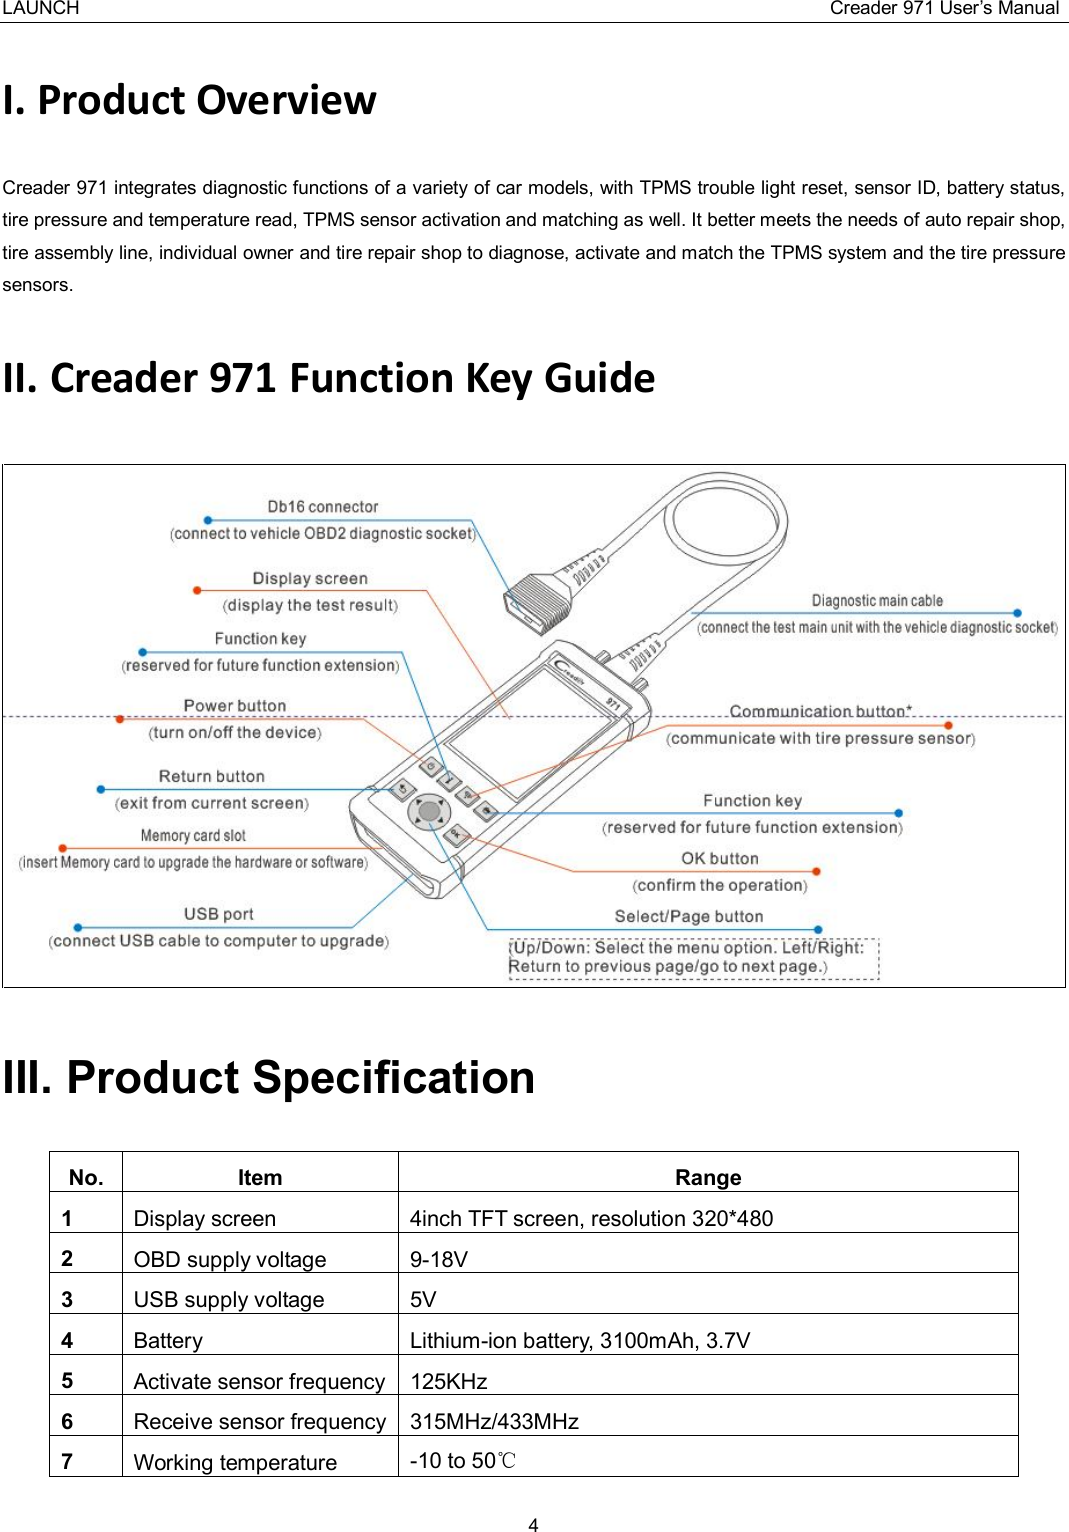 LAUNCH                                                                                Creader 971 User’s Manual 4  I. Product Overview Creader 971 integrates diagnostic functions of a variety of car models, with TPMS trouble light reset, sensor ID, battery status, tire pressure and temperature read, TPMS sensor activation and matching as well. It better meets the needs of auto repair shop, tire assembly line, individual owner and tire repair shop to diagnose, activate and match the TPMS system and the tire pressure sensors. II. Creader 971 Function Key Guide  III. Product Specification No. Item Range 1  Display screen 4inch TFT screen, resolution 320*480 2  OBD supply voltage 9-18V 3  USB supply voltage 5V 4  Battery Lithium-ion battery, 3100mAh, 3.7V 5  Activate sensor frequency 125KHz 6  Receive sensor frequency 315MHz/433MHz 7  Working temperature -10 to 50℃ 